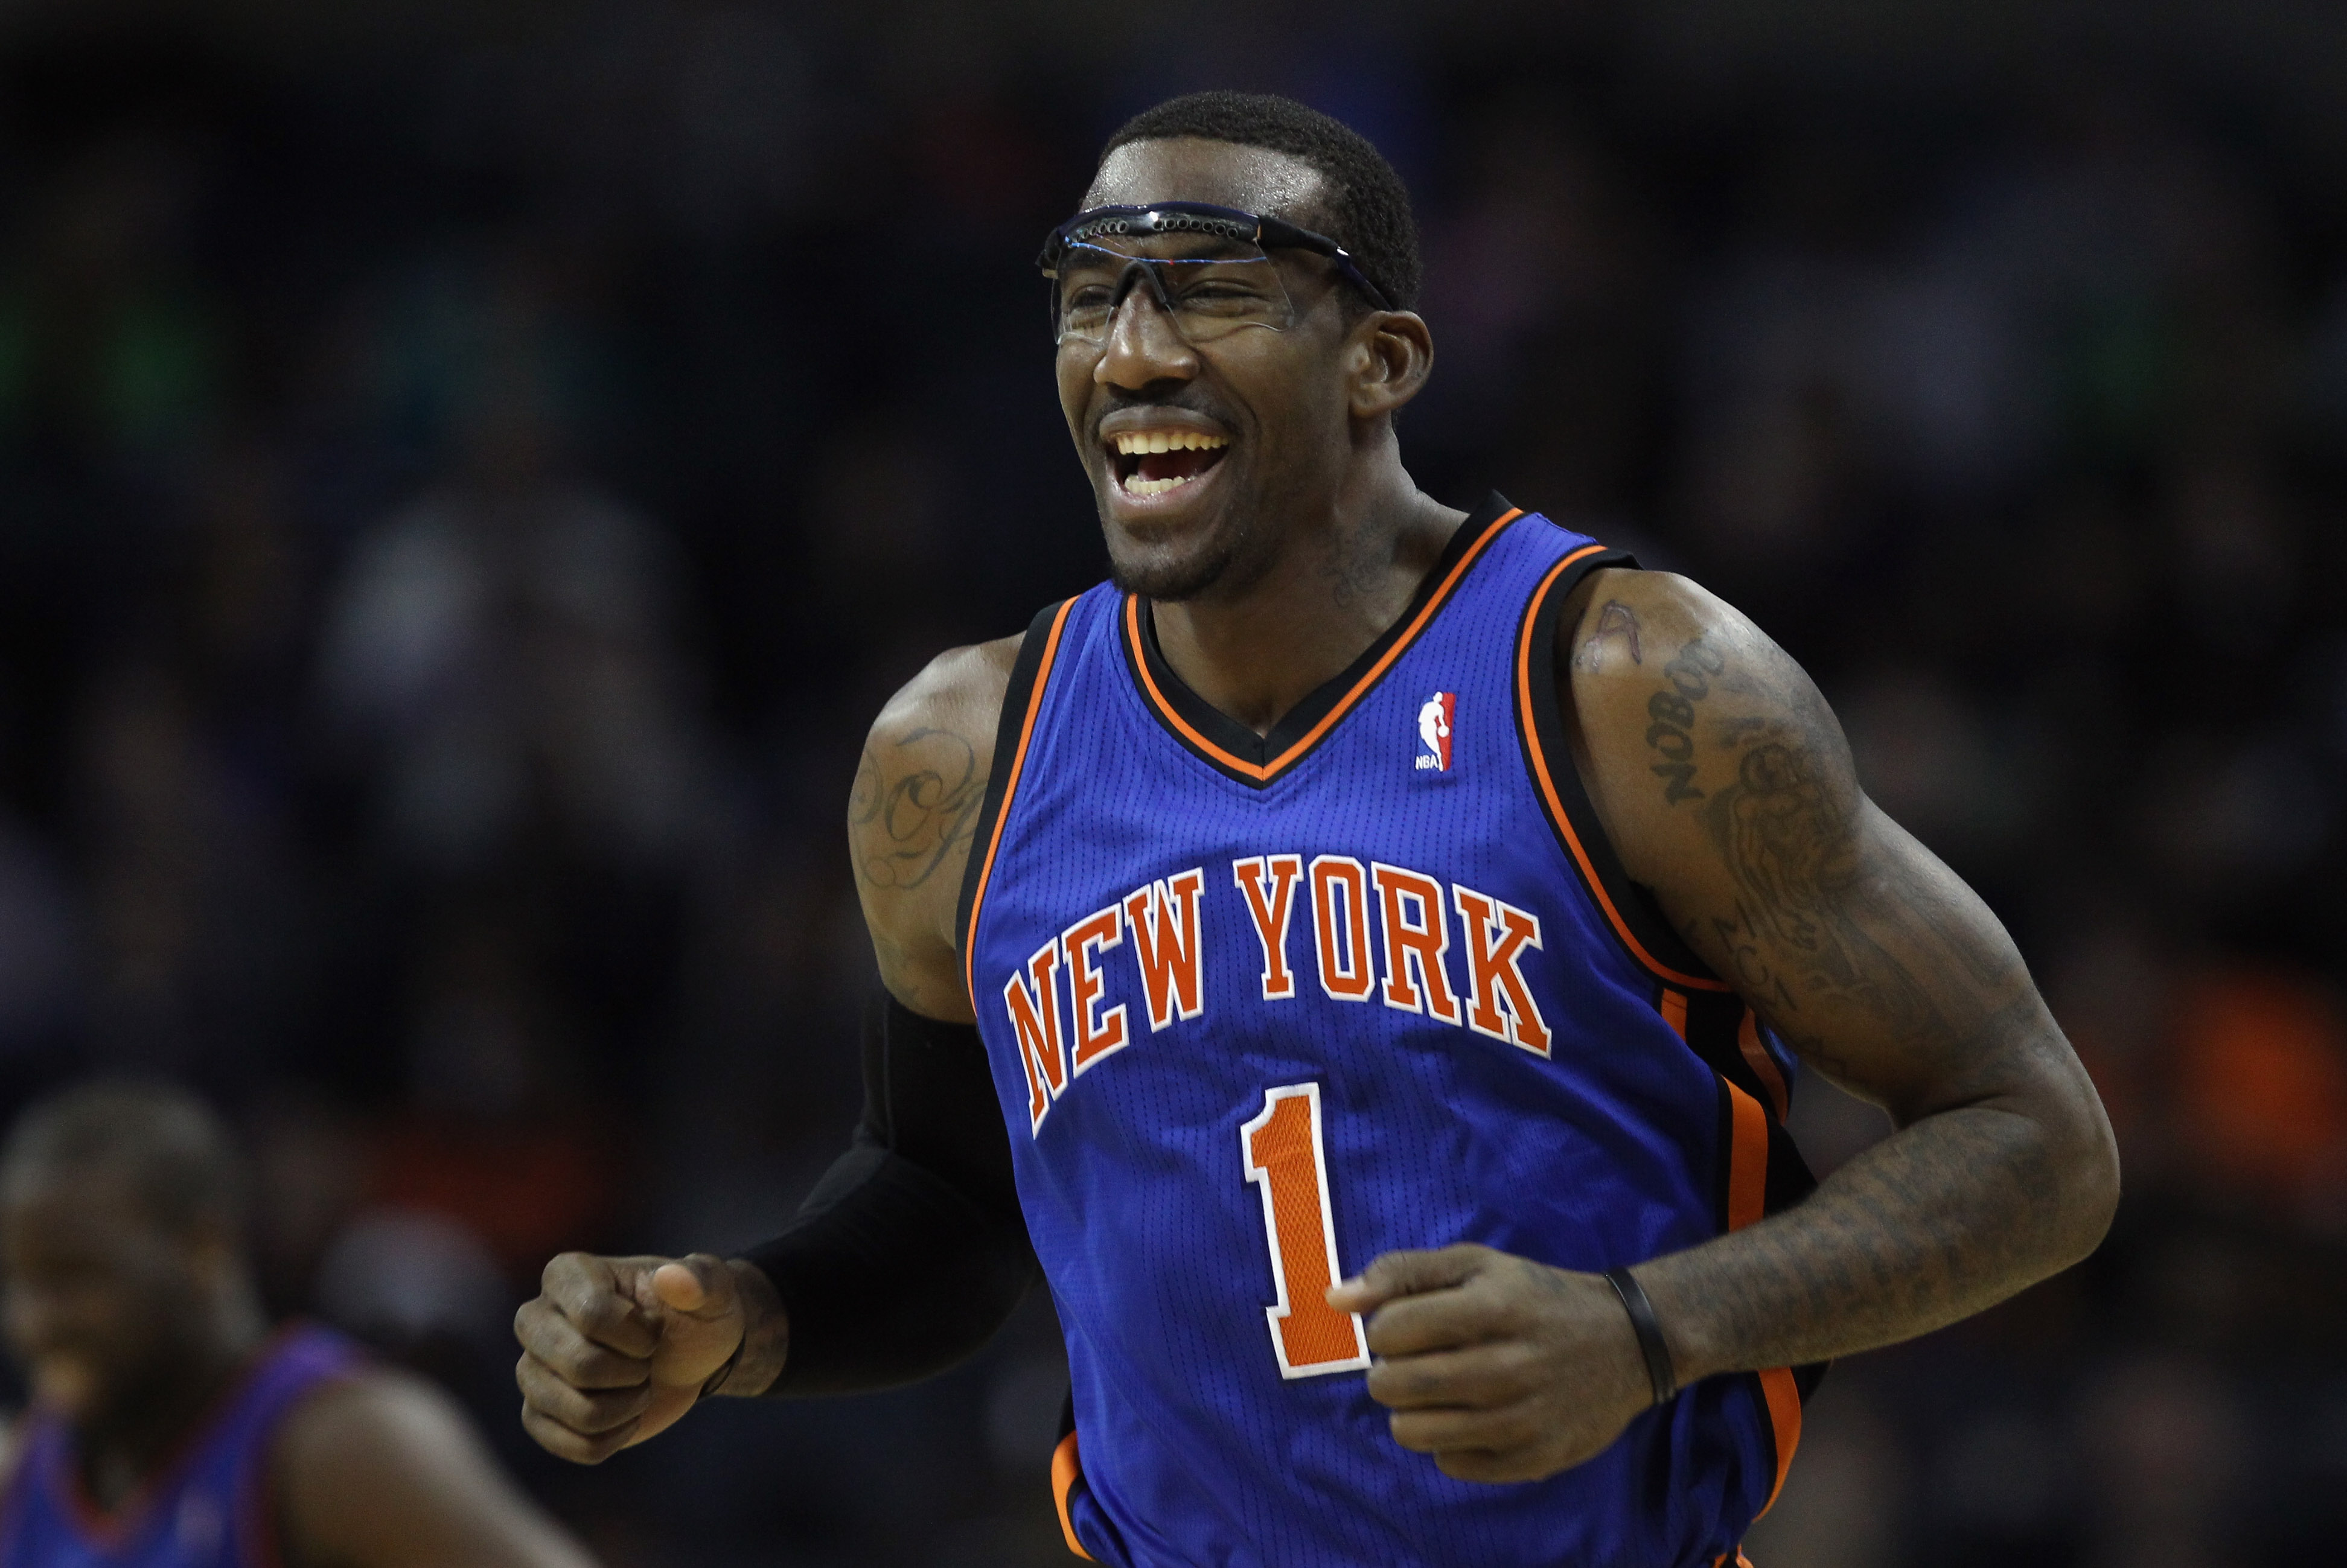 CHARLOTTE, NC - NOVEMBER 24:  Amare Stoudemire #1 of the New York Knicks during his game against the Charlotte Bobcats at Time Warner Cable Arena on November 24, 2010 in Charlotte, North Carolina.  NOTE TO USER: User expressly acknowledges and agrees that